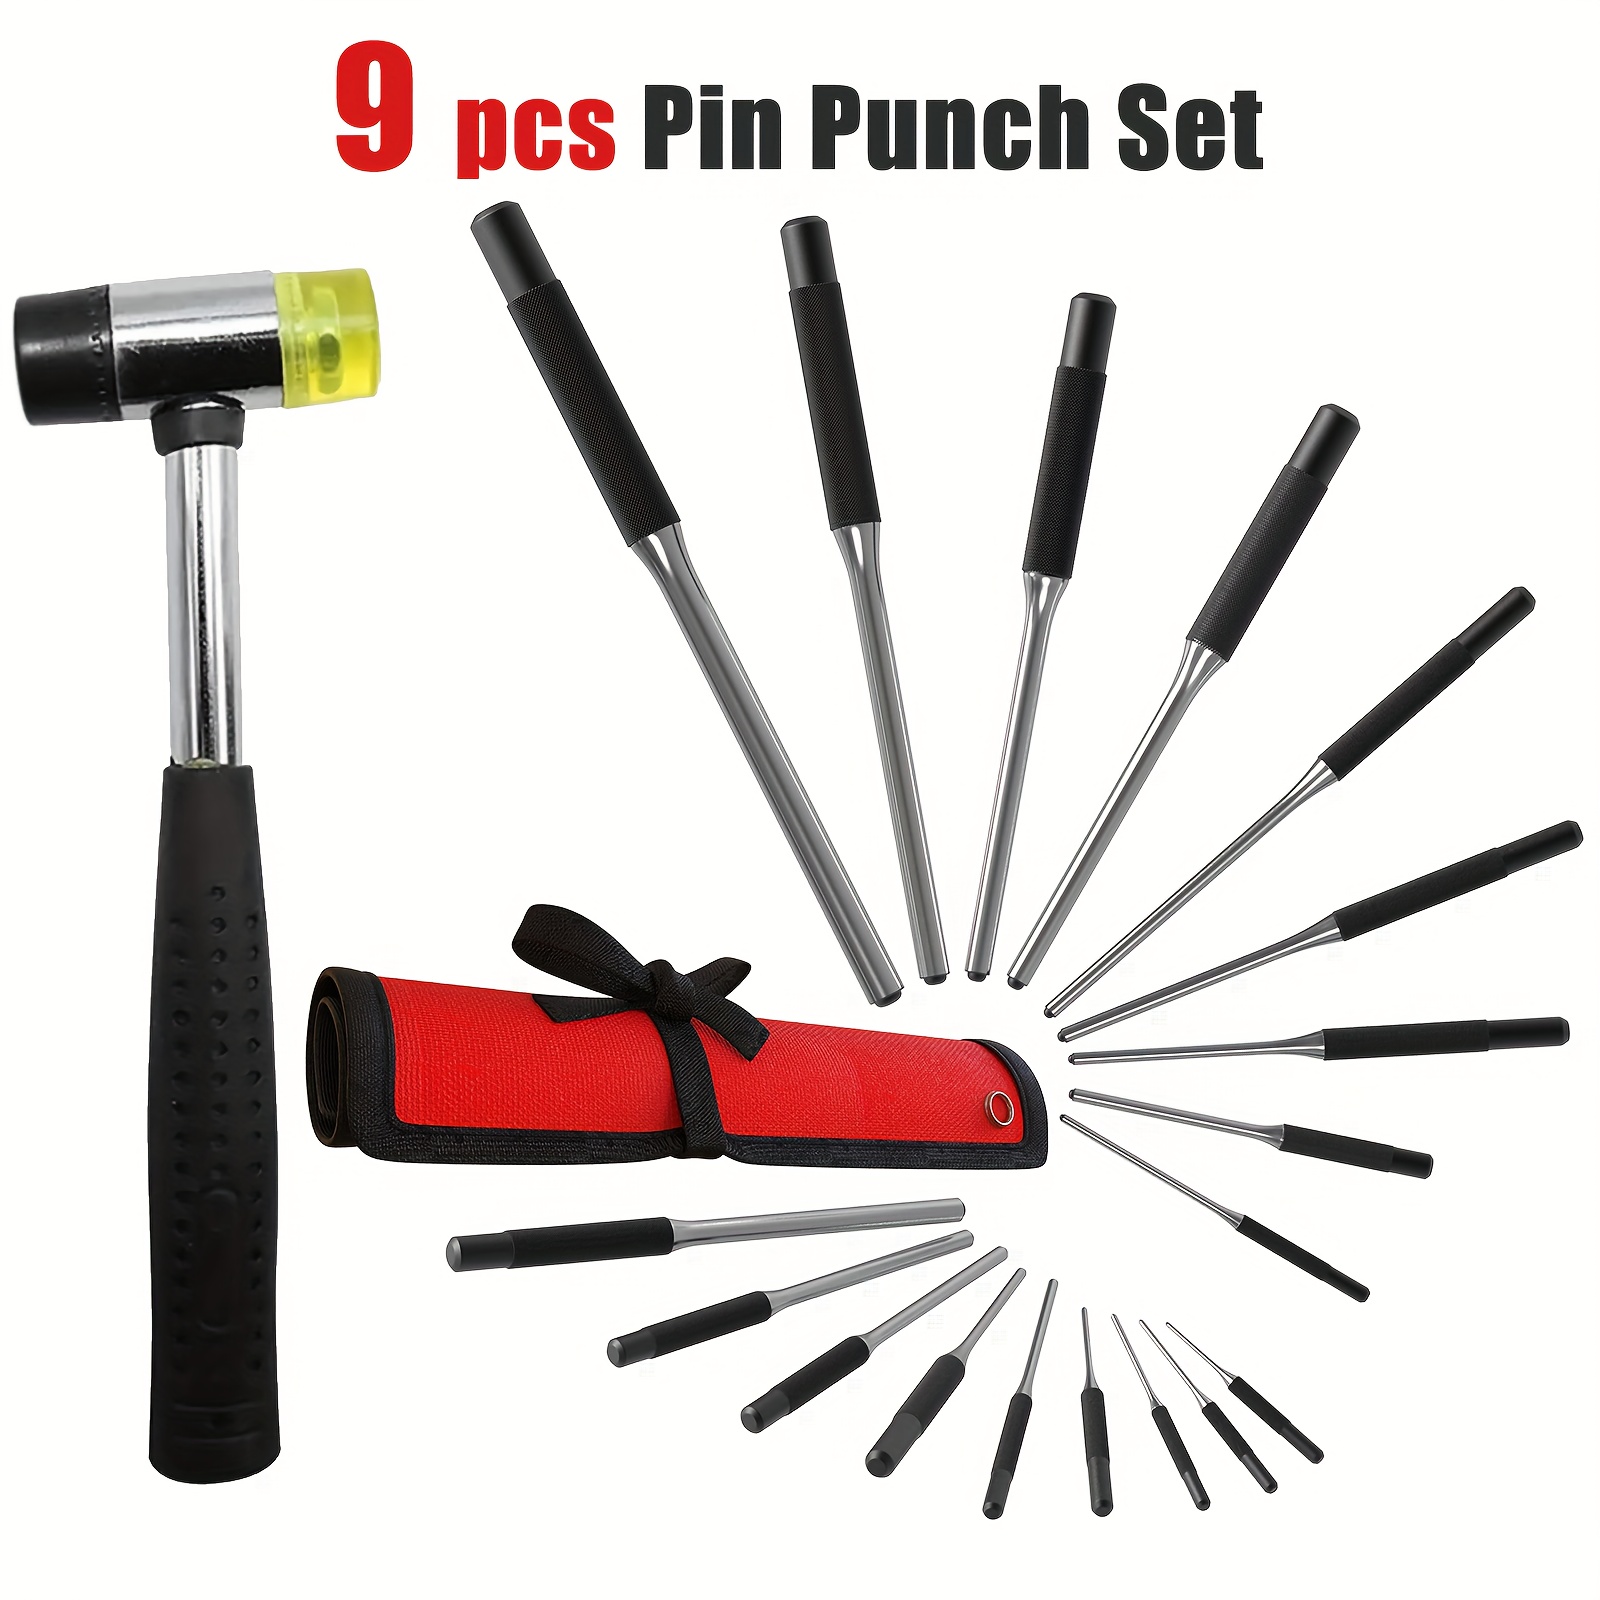 

5pcs/9pcs Pin Punch Set With Roll Up Storage Pouch Removing Repair Tool 1.6mm-8mm 1/16"-5/16" For Automotive, Watch Repair, Jewelry, Craft, Woodworking